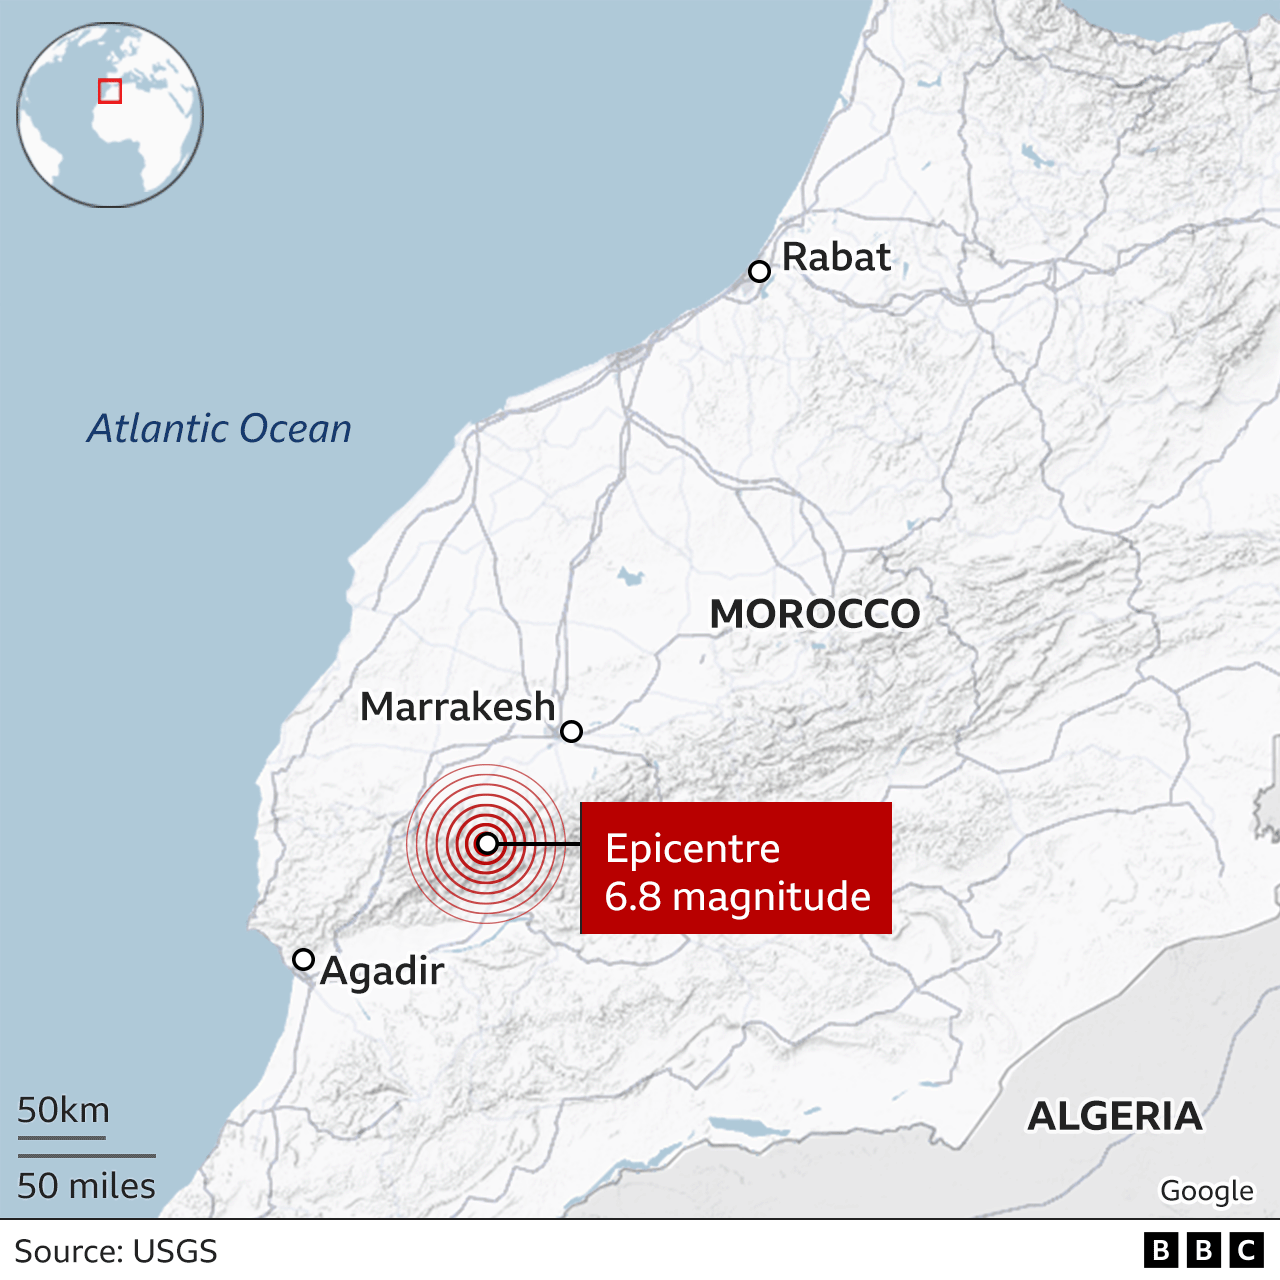 Map of Morocco showing epicentre of earthquake